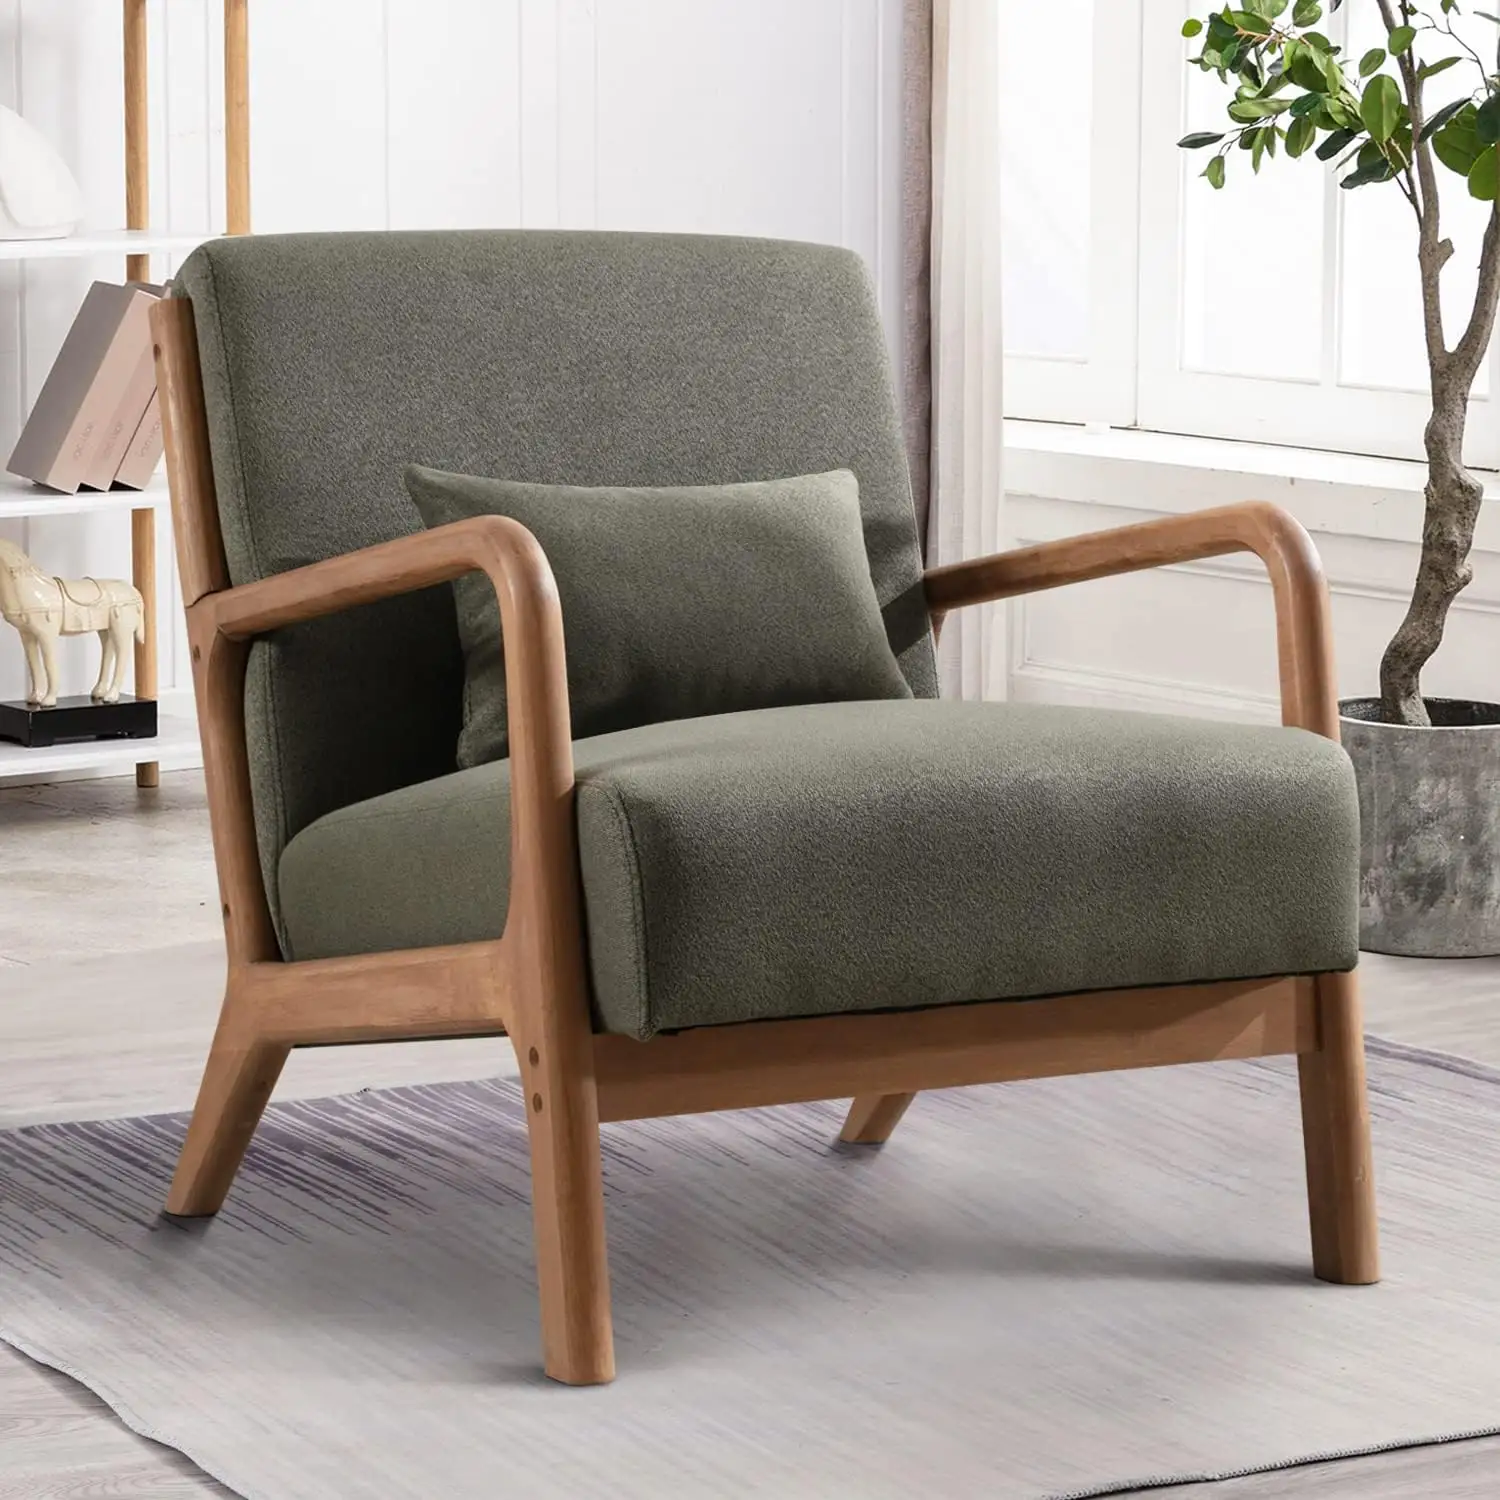 Mid Century Modern Accent Chair with Wood Frame, Upholstered Living Room Chairs with Waist Cushion